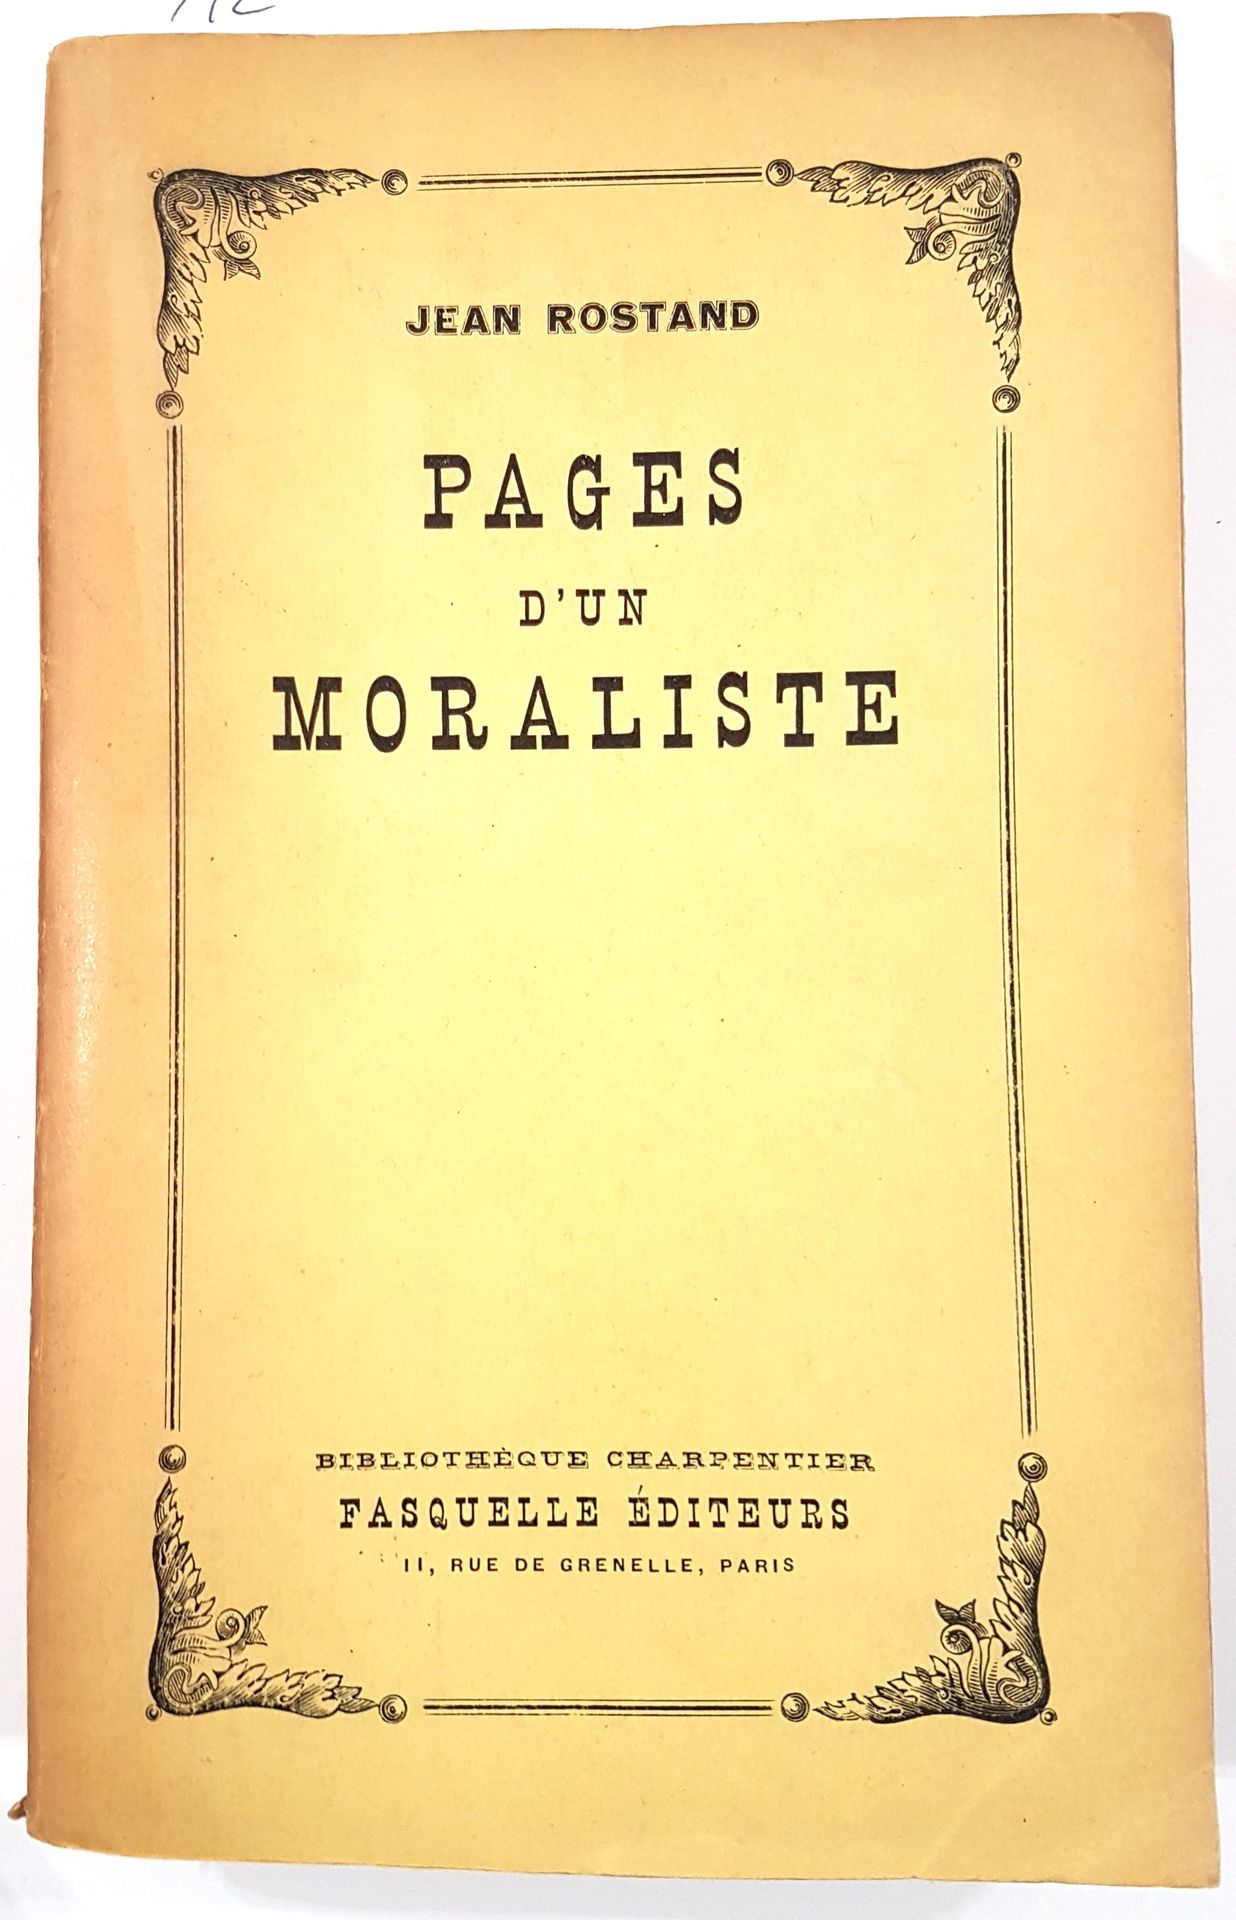 Null JEAN ROSTAND, Pages d'un moraliste, ed Fasquelle, Paris, 1952
Dedicated by &hellip;